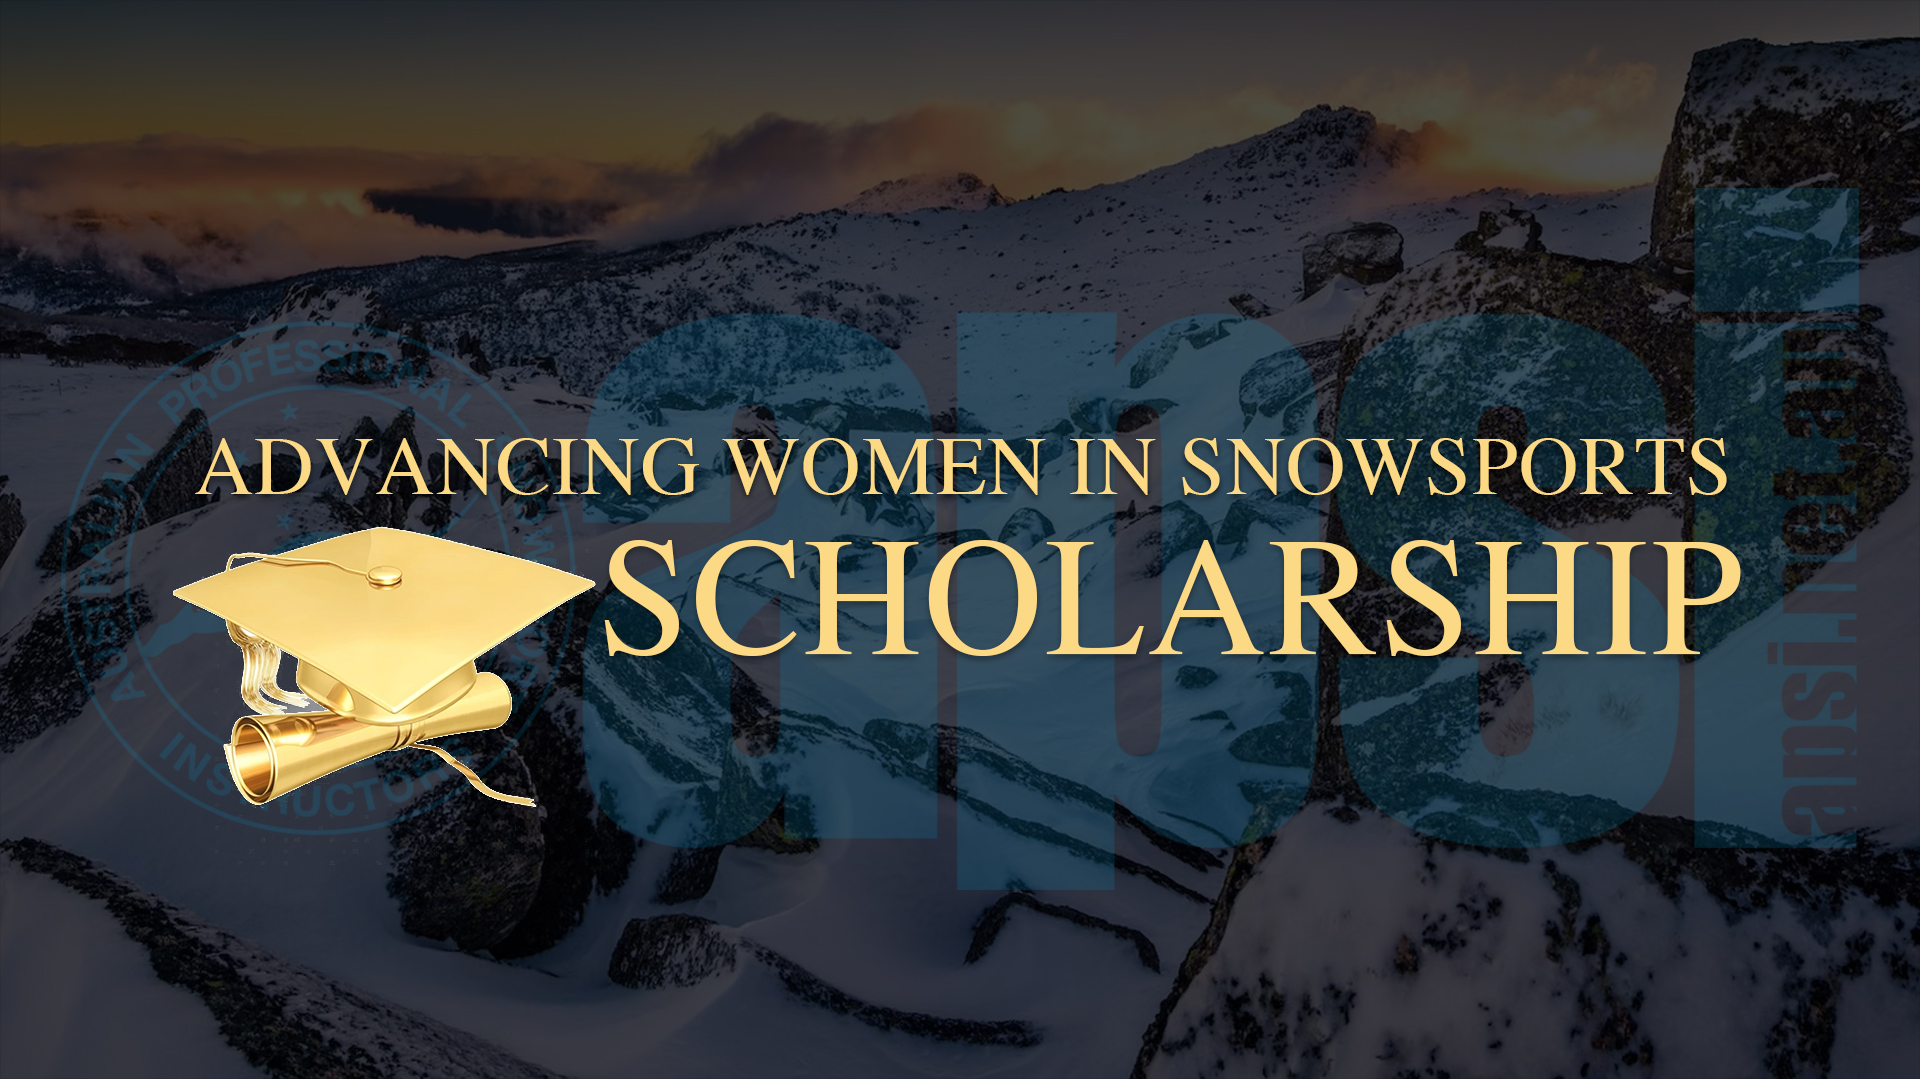 Advancing Women in Snowsports Scholarship Awarded